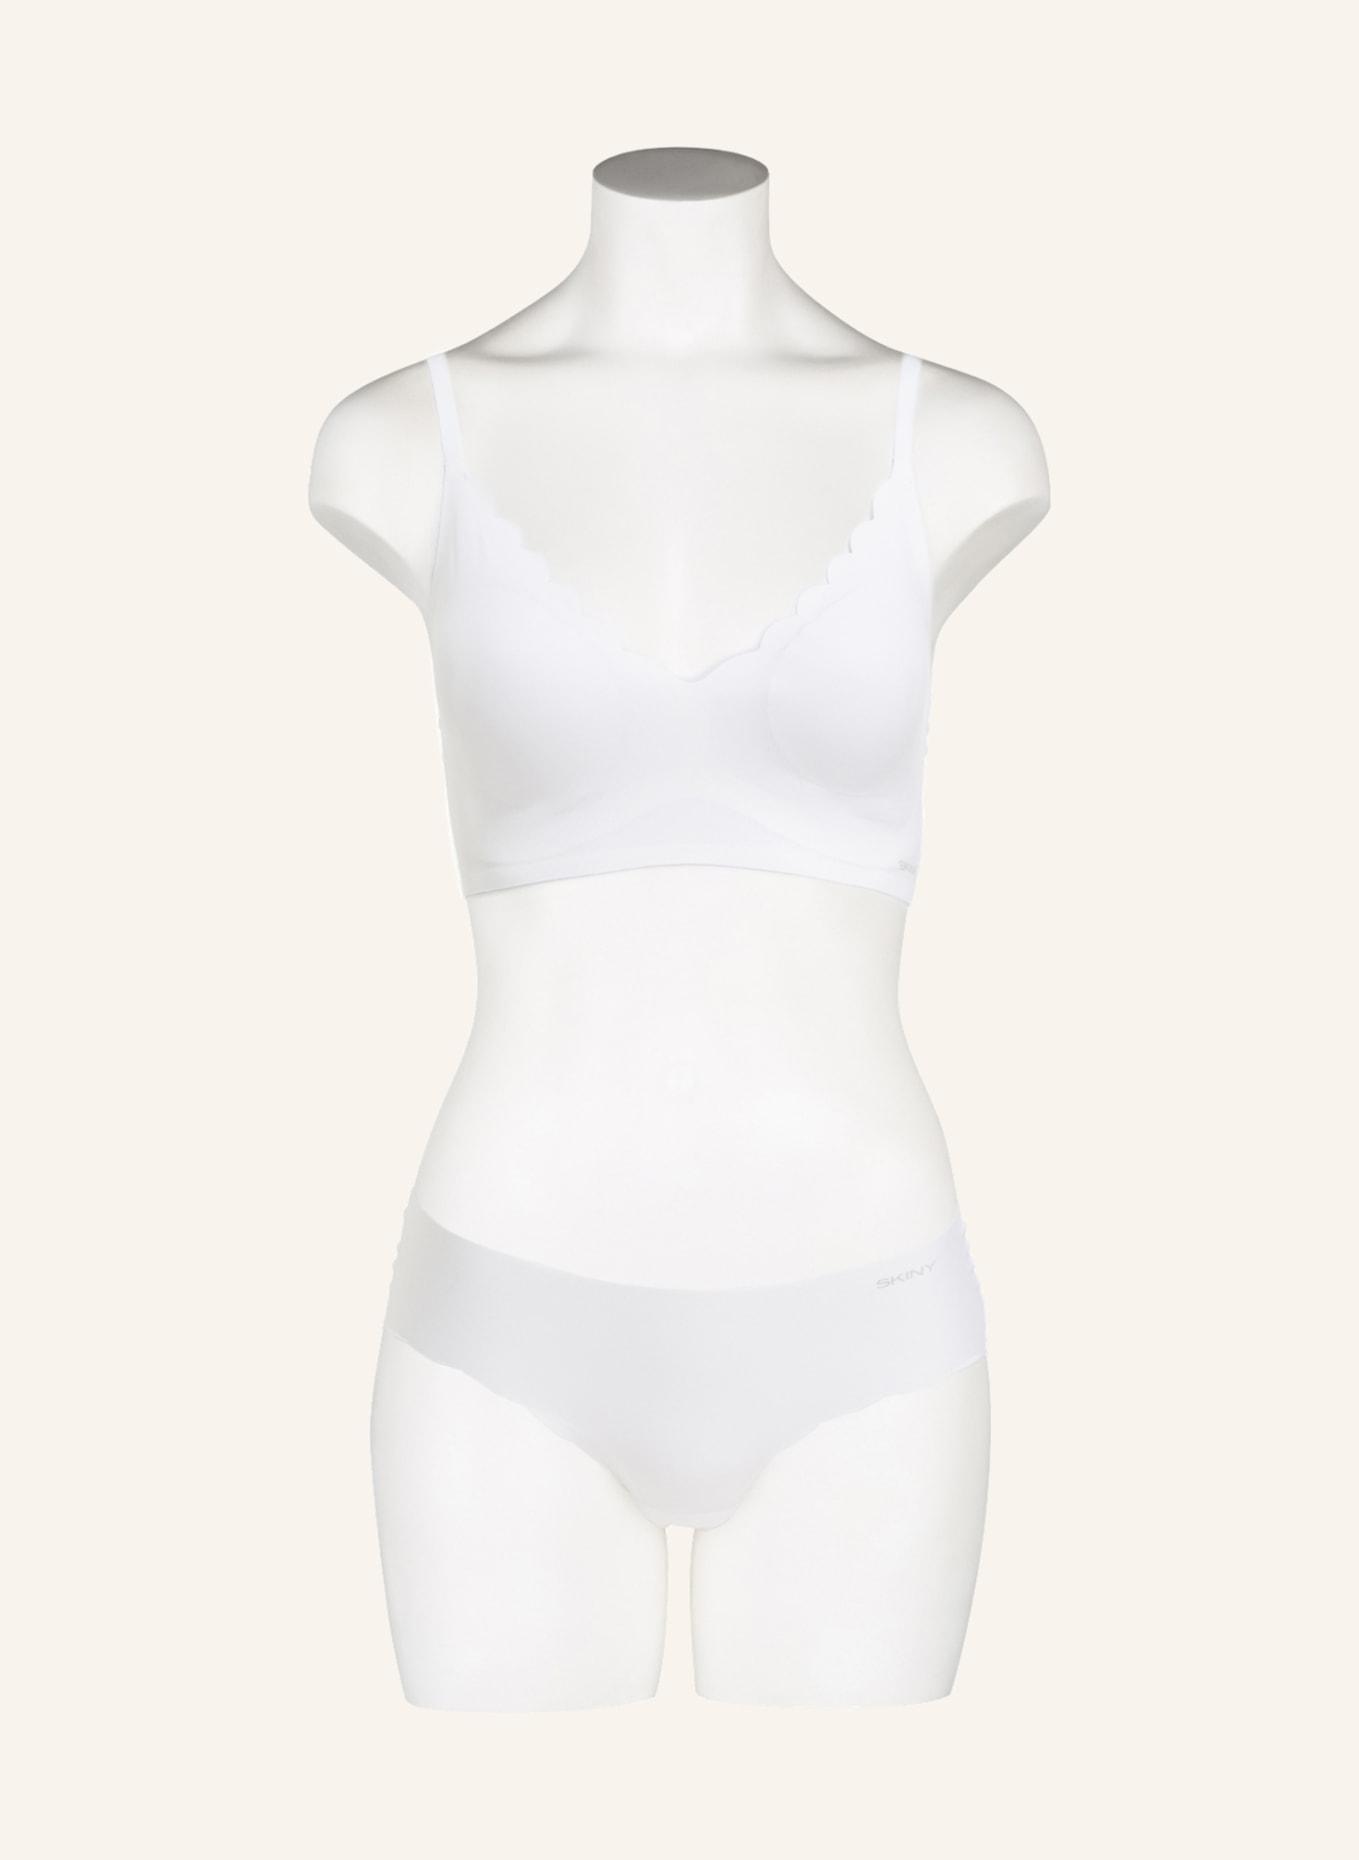 Skiny Bustier EVERY DAY IN MICRO ESSENTIALS, Farbe: WEISS (Bild 2)